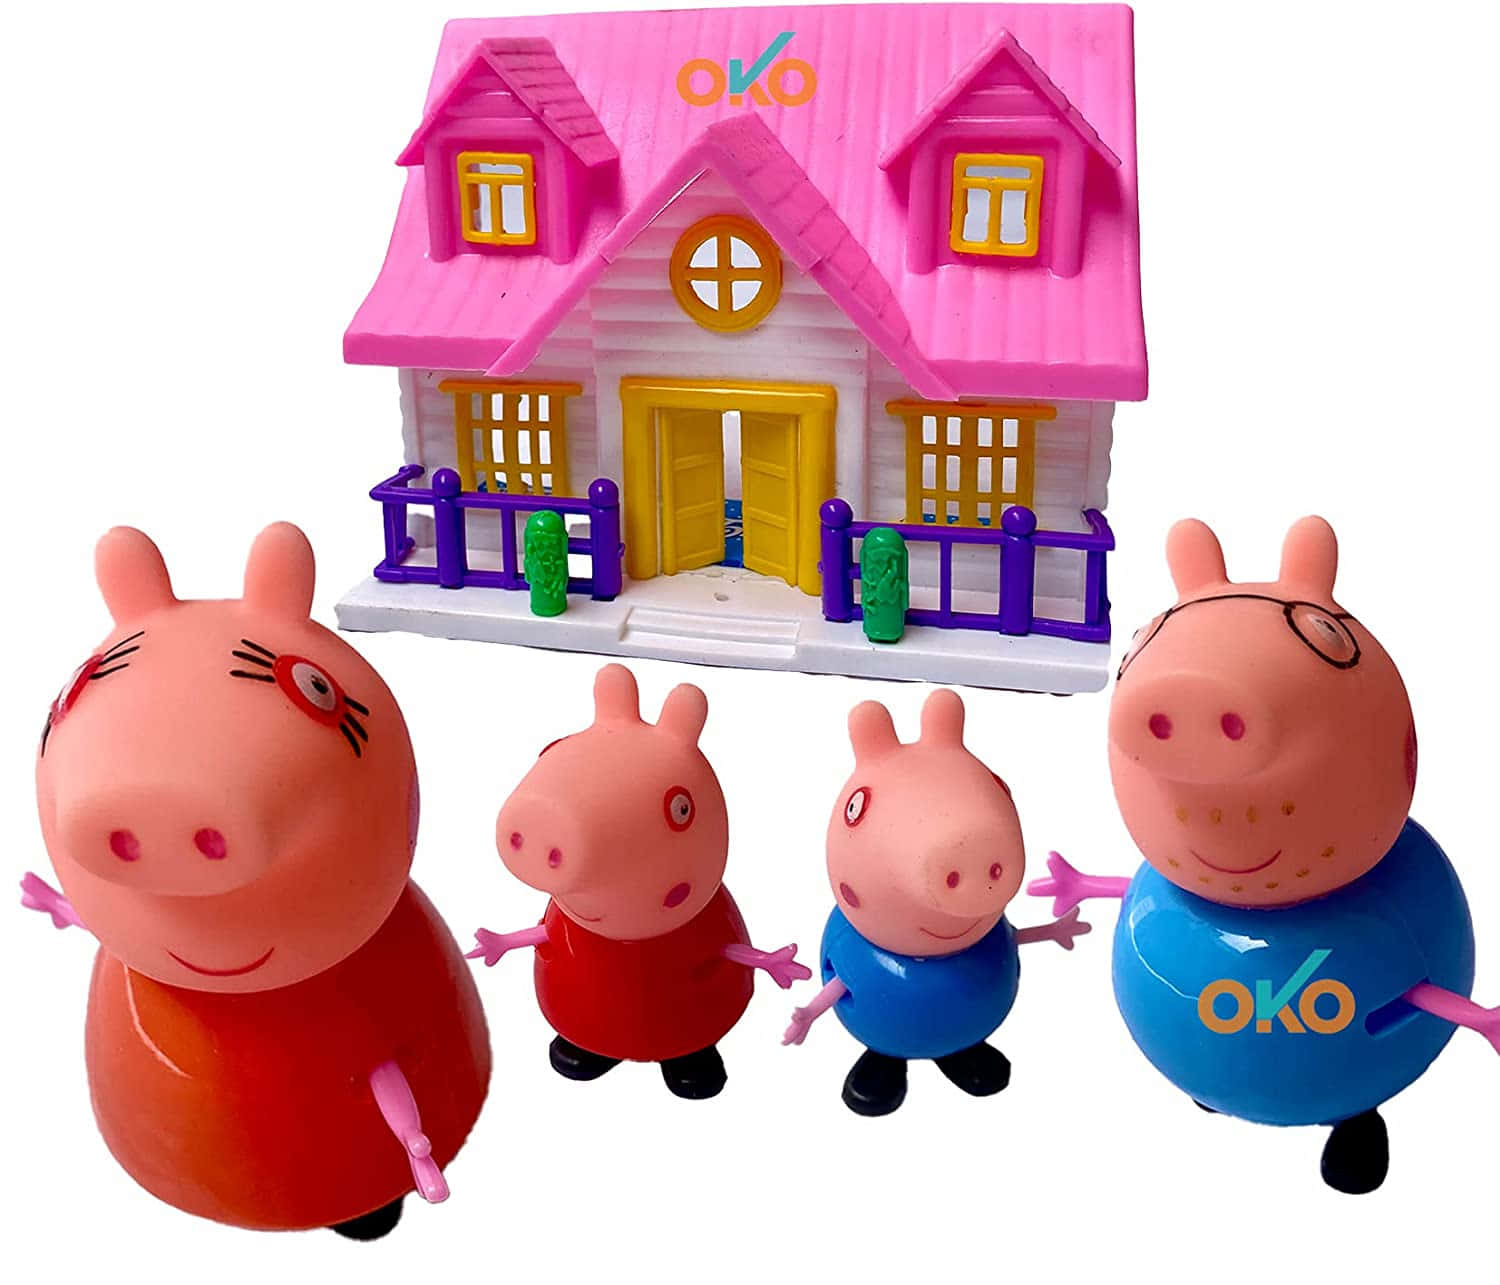 Peppa Pig Family enjoying a day at the park.